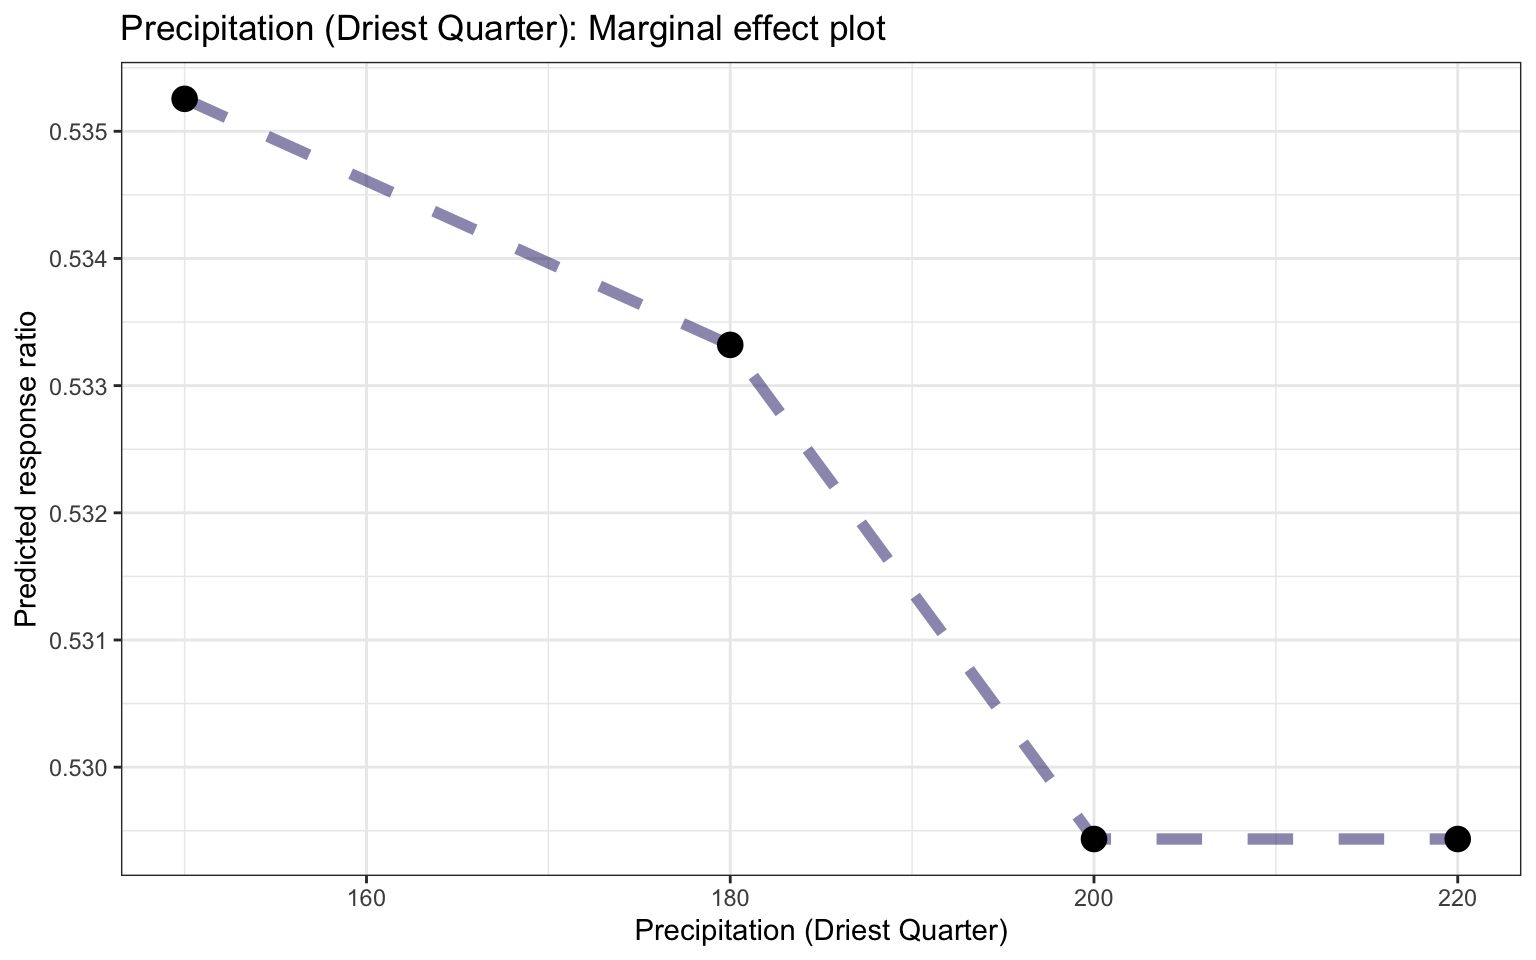 Marginal effects plot for precipitation of driest quarter based on the RF model